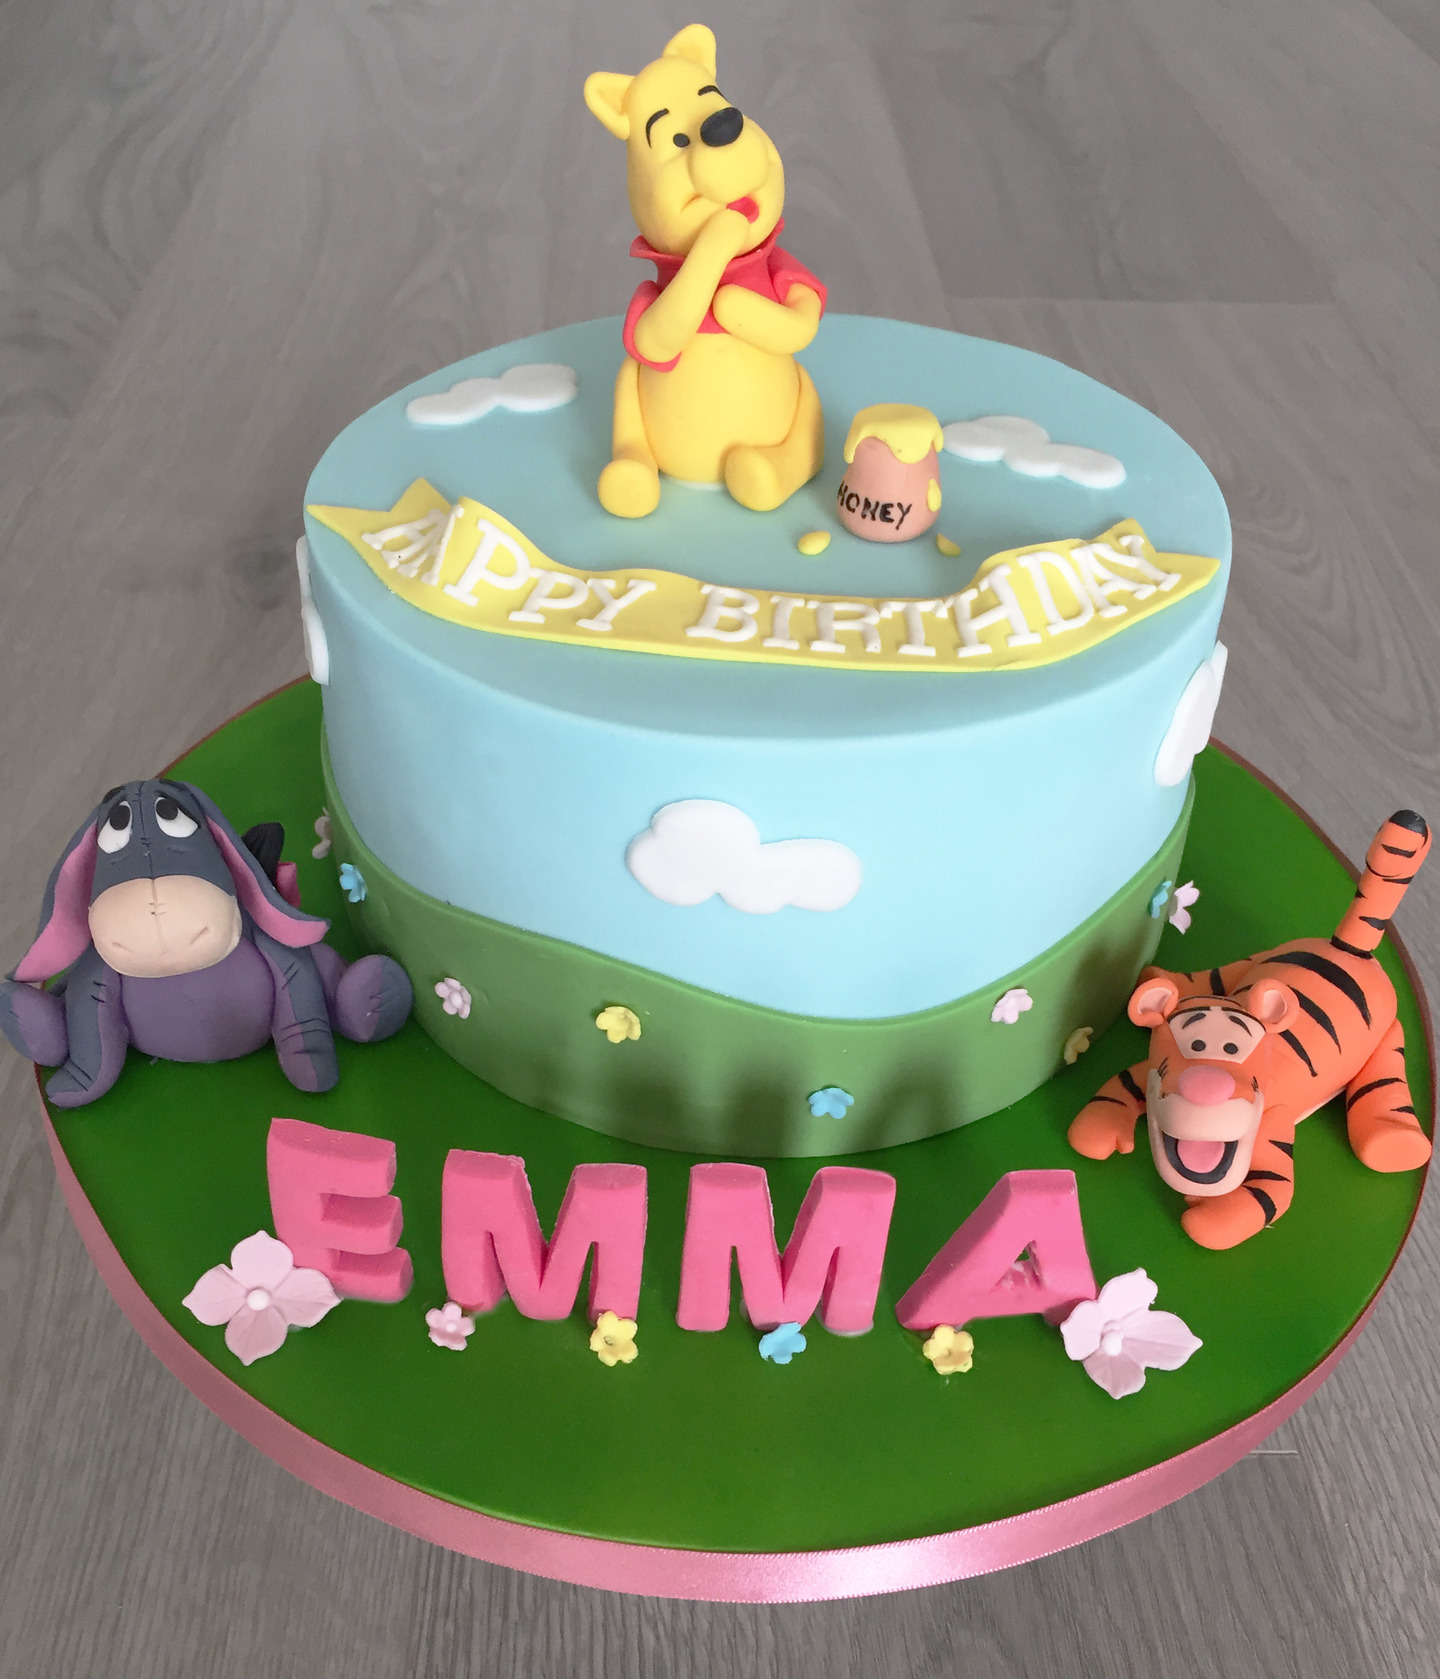 Cakes by Lynzie Dublin | Bakers and Cakers